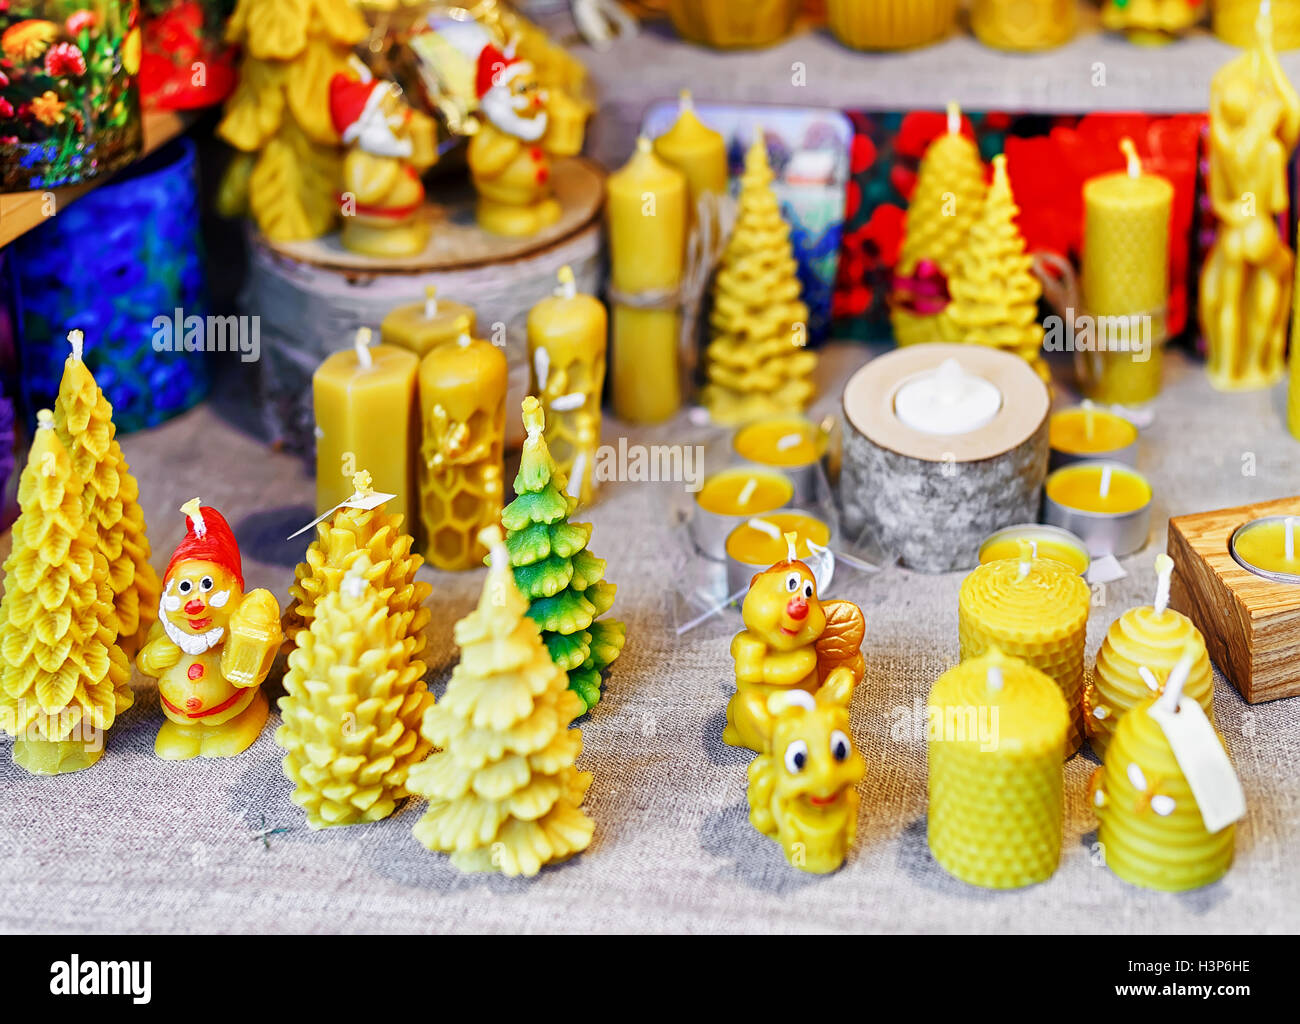 Handmade candles displayed for sale at the stall during the Riga Christmas market in Latvia. The fair takes place from the beginning of December till the start of January. Stock Photo